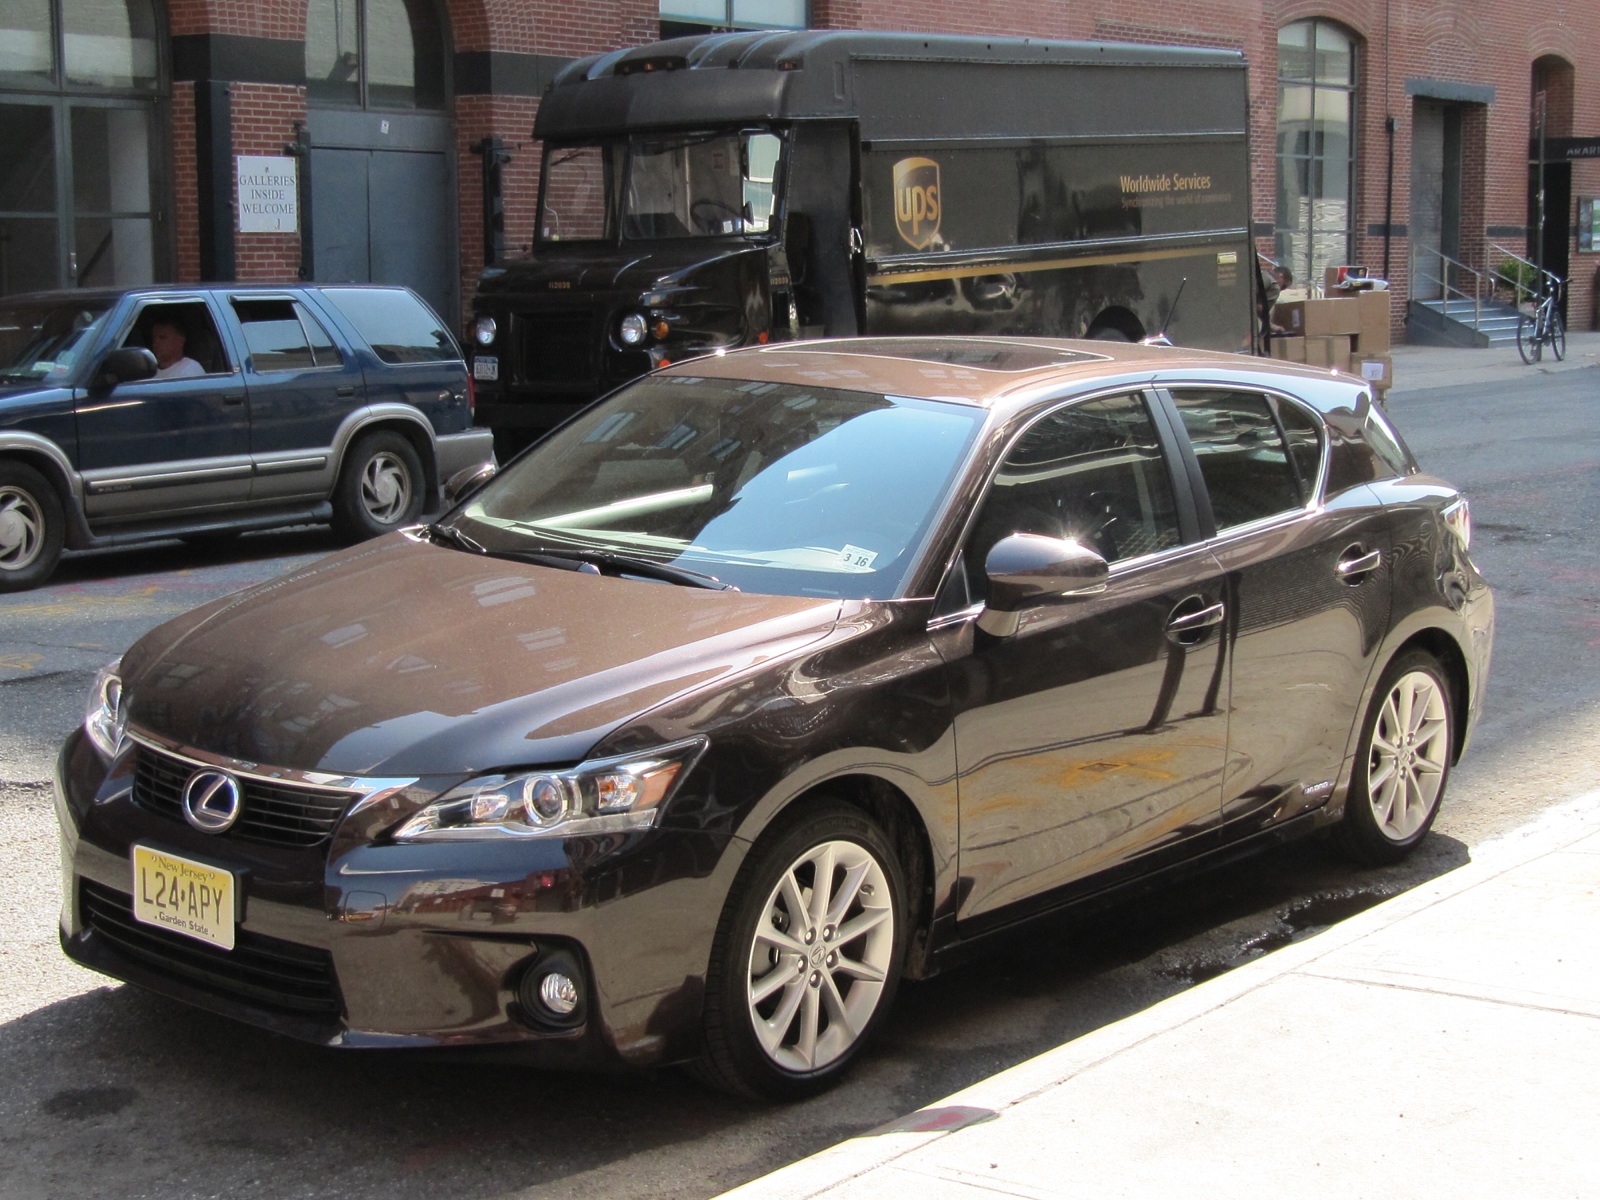 2011 Lexus Ct 200h Compact Hybrid Hatch First Drive Review